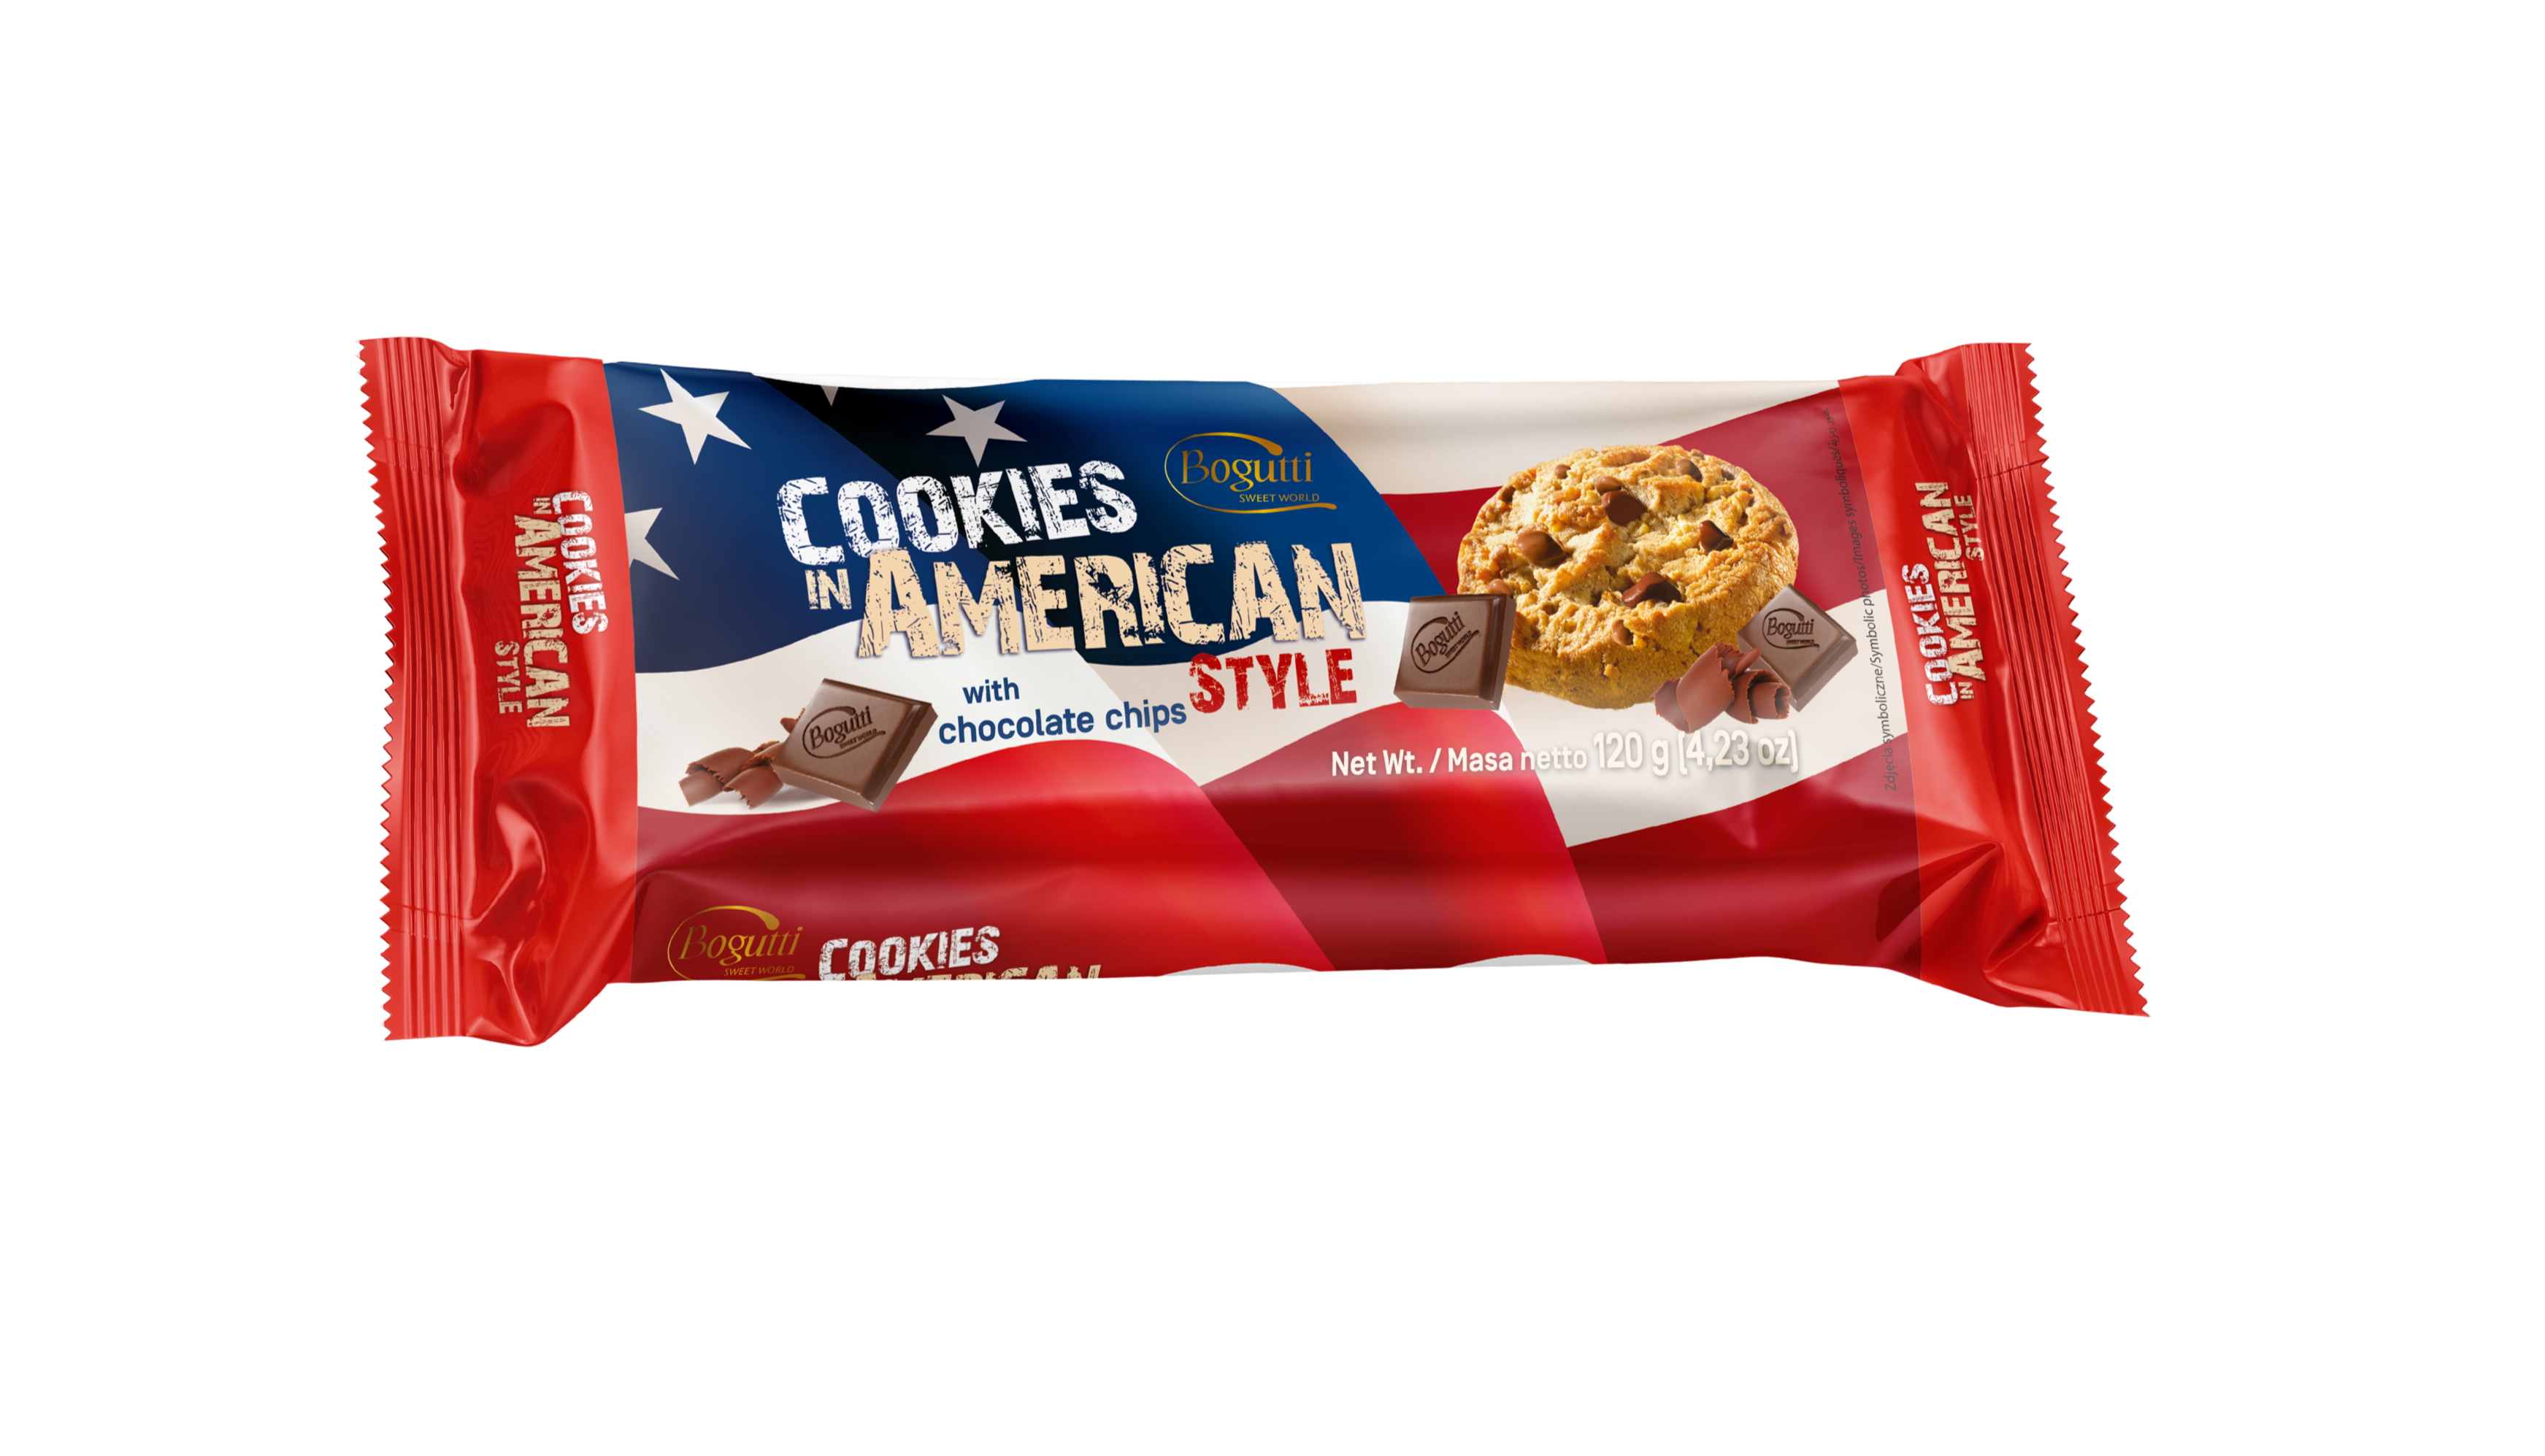 Cookies in American Style – Crunchy cookies with chocolate